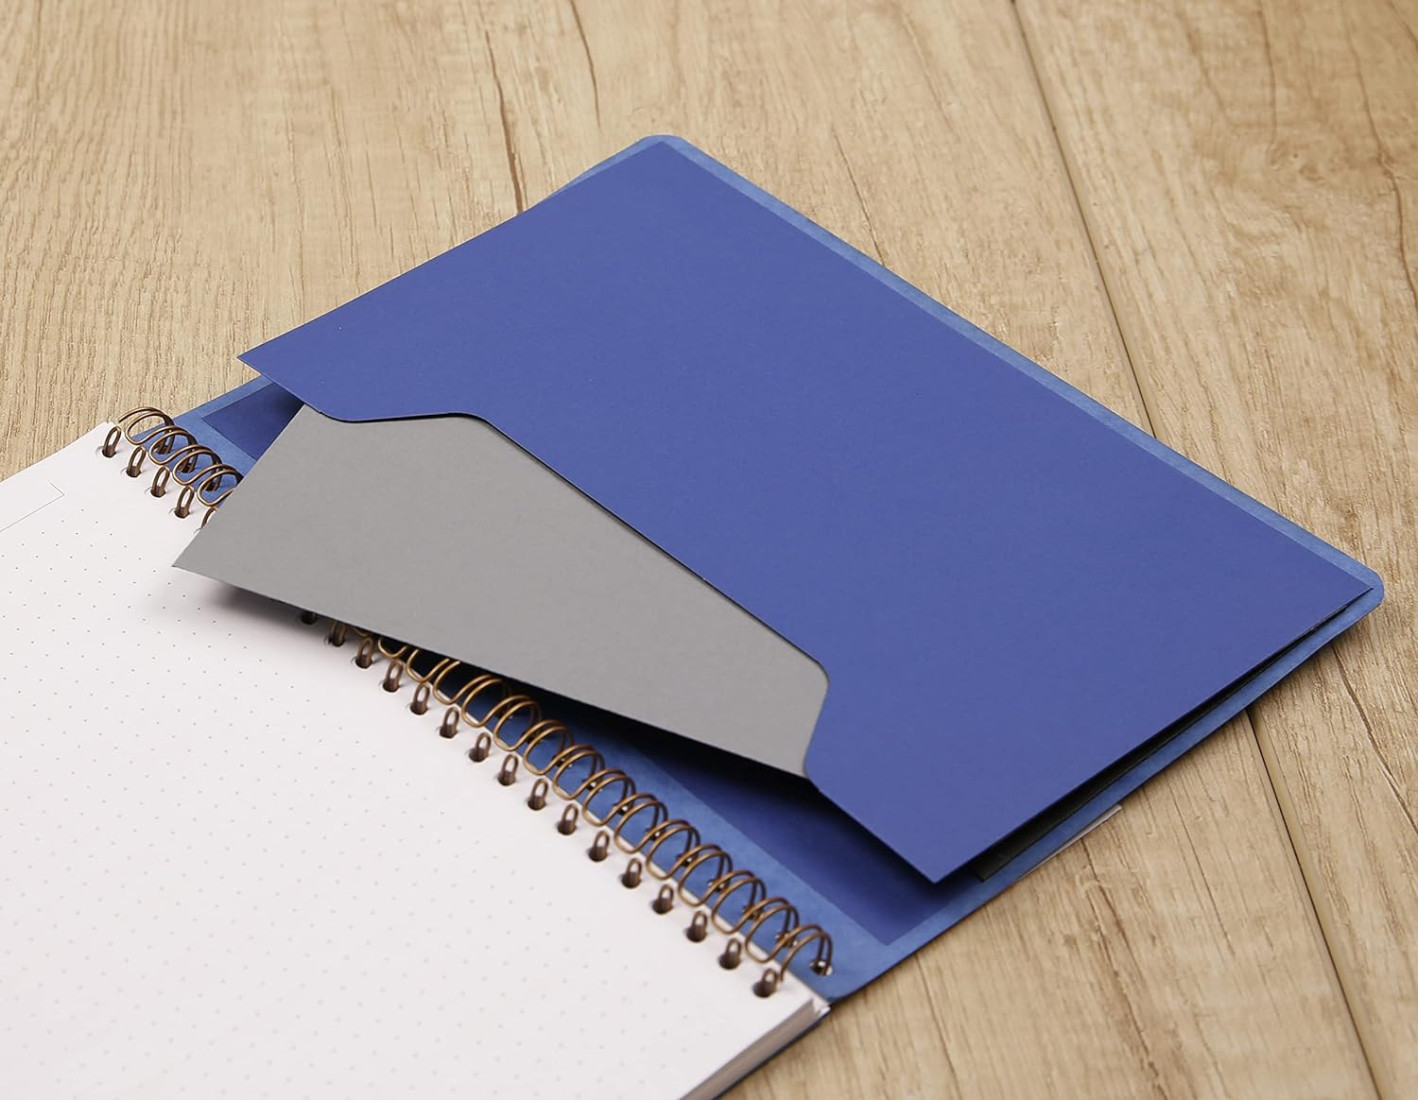 Clairefontaine 78346C Collection Age Bag A My.Notes Tabac Spiral Notebook with Tear-Off Margins - A4 21 x 29.7 cm - 120 Lined Tear-Off Pages - 90g White Paper - Leather Grain Gloss Card Cover